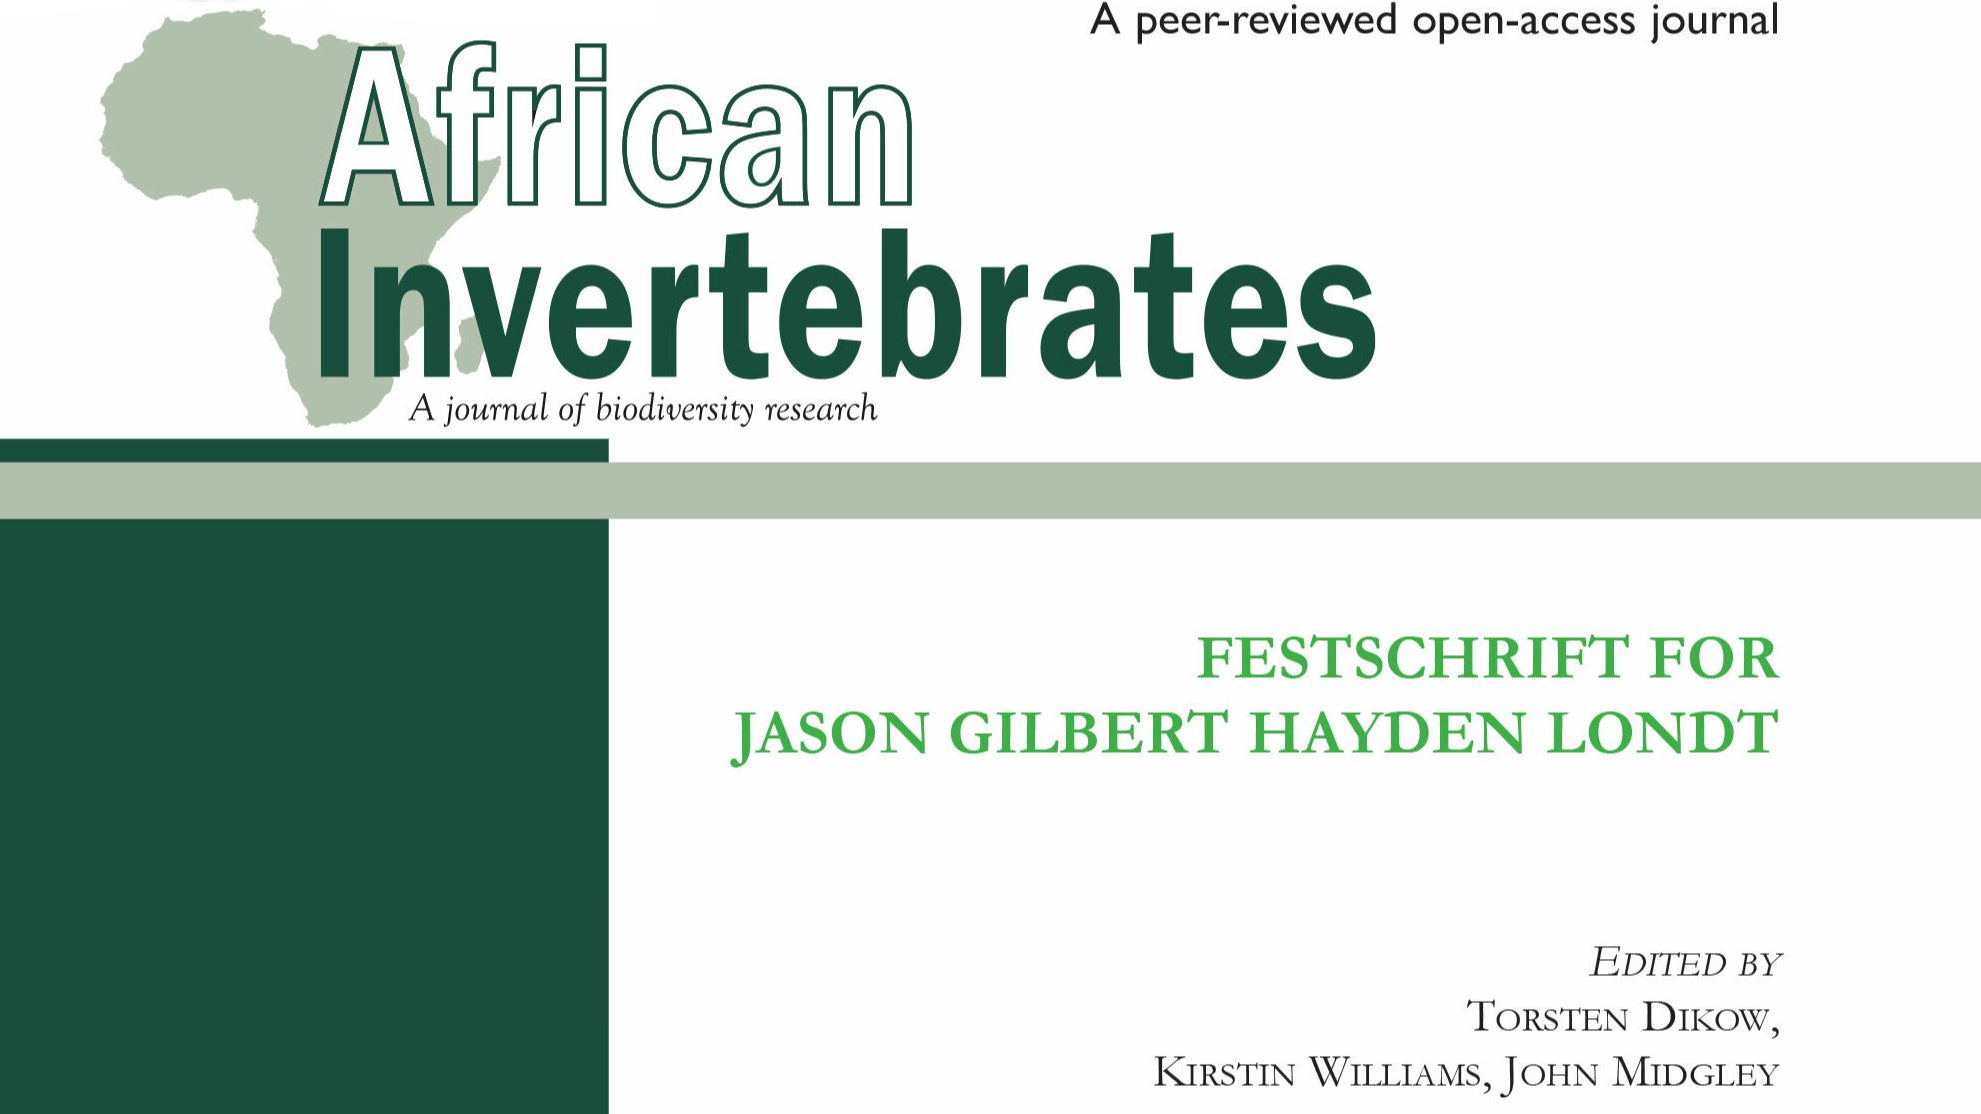 New African Invertebrates issue celebrates the work of Dr Jason G. H. Londt